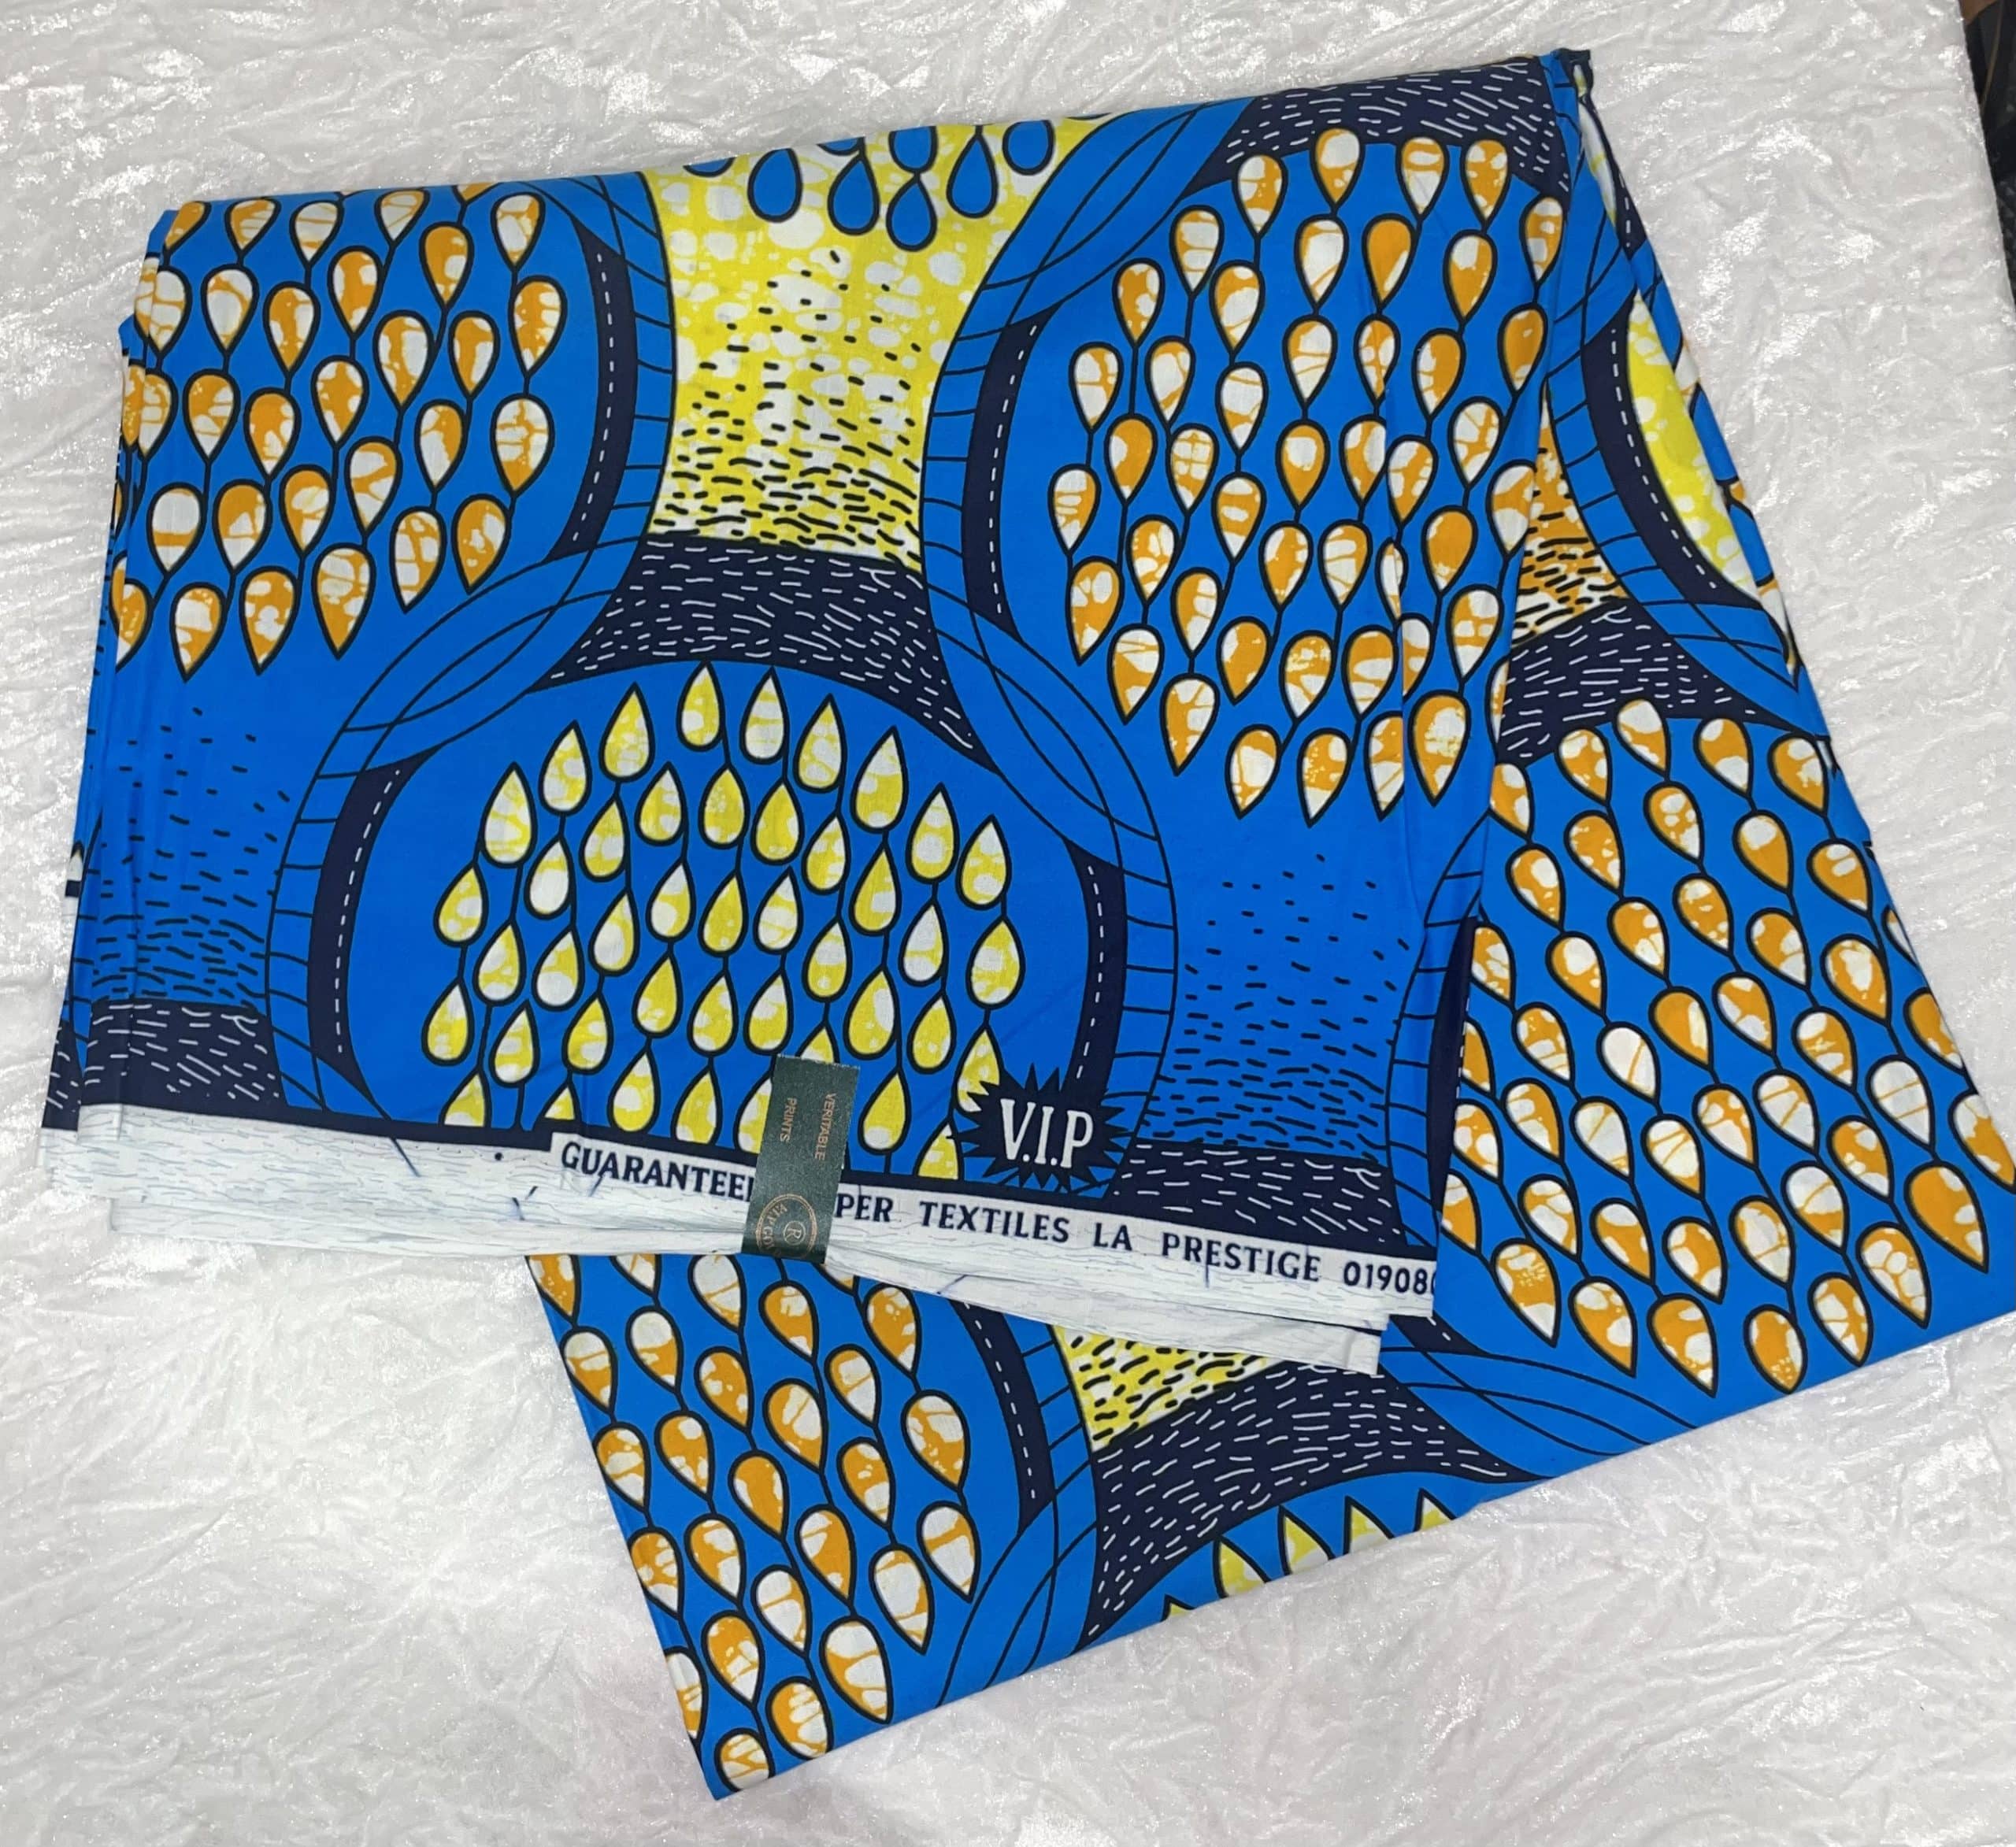 Jtaphrique - This African kente bandeau and joggers set is perfect for the  summer. Bandeau style is comfortable as it allows you to be free and the  joggers are very roomy with